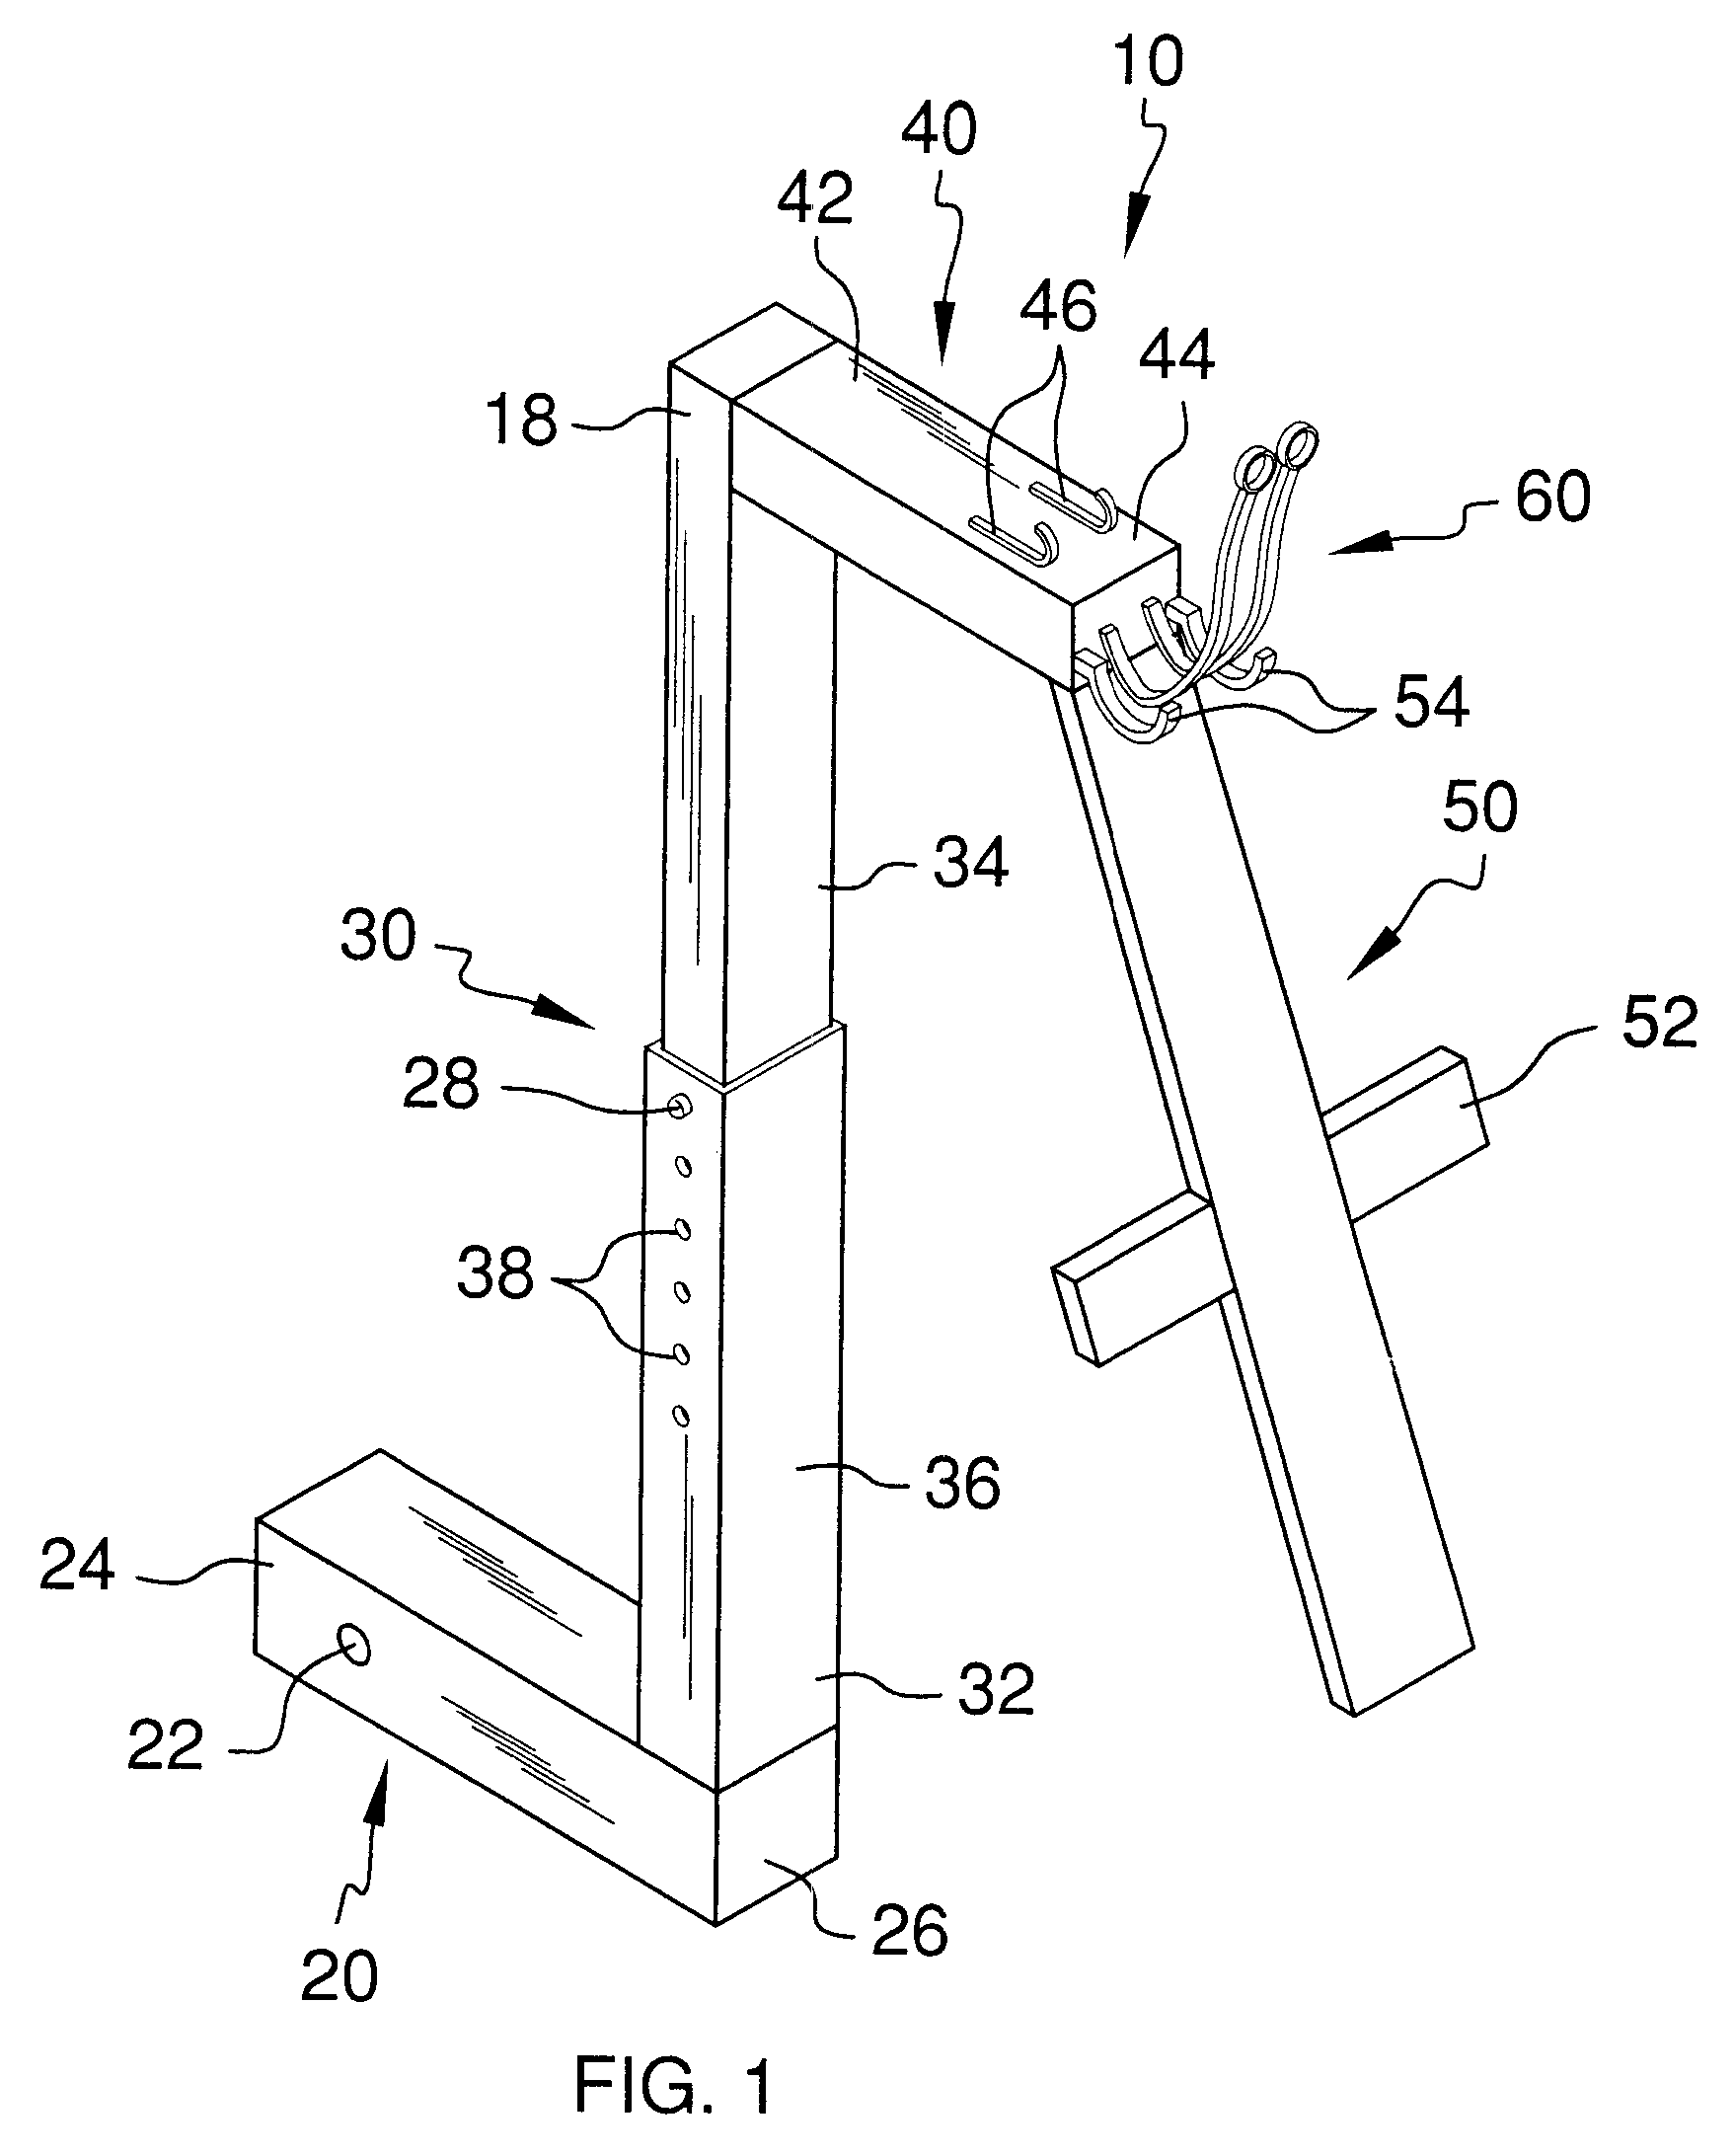 Refuse container hitching device